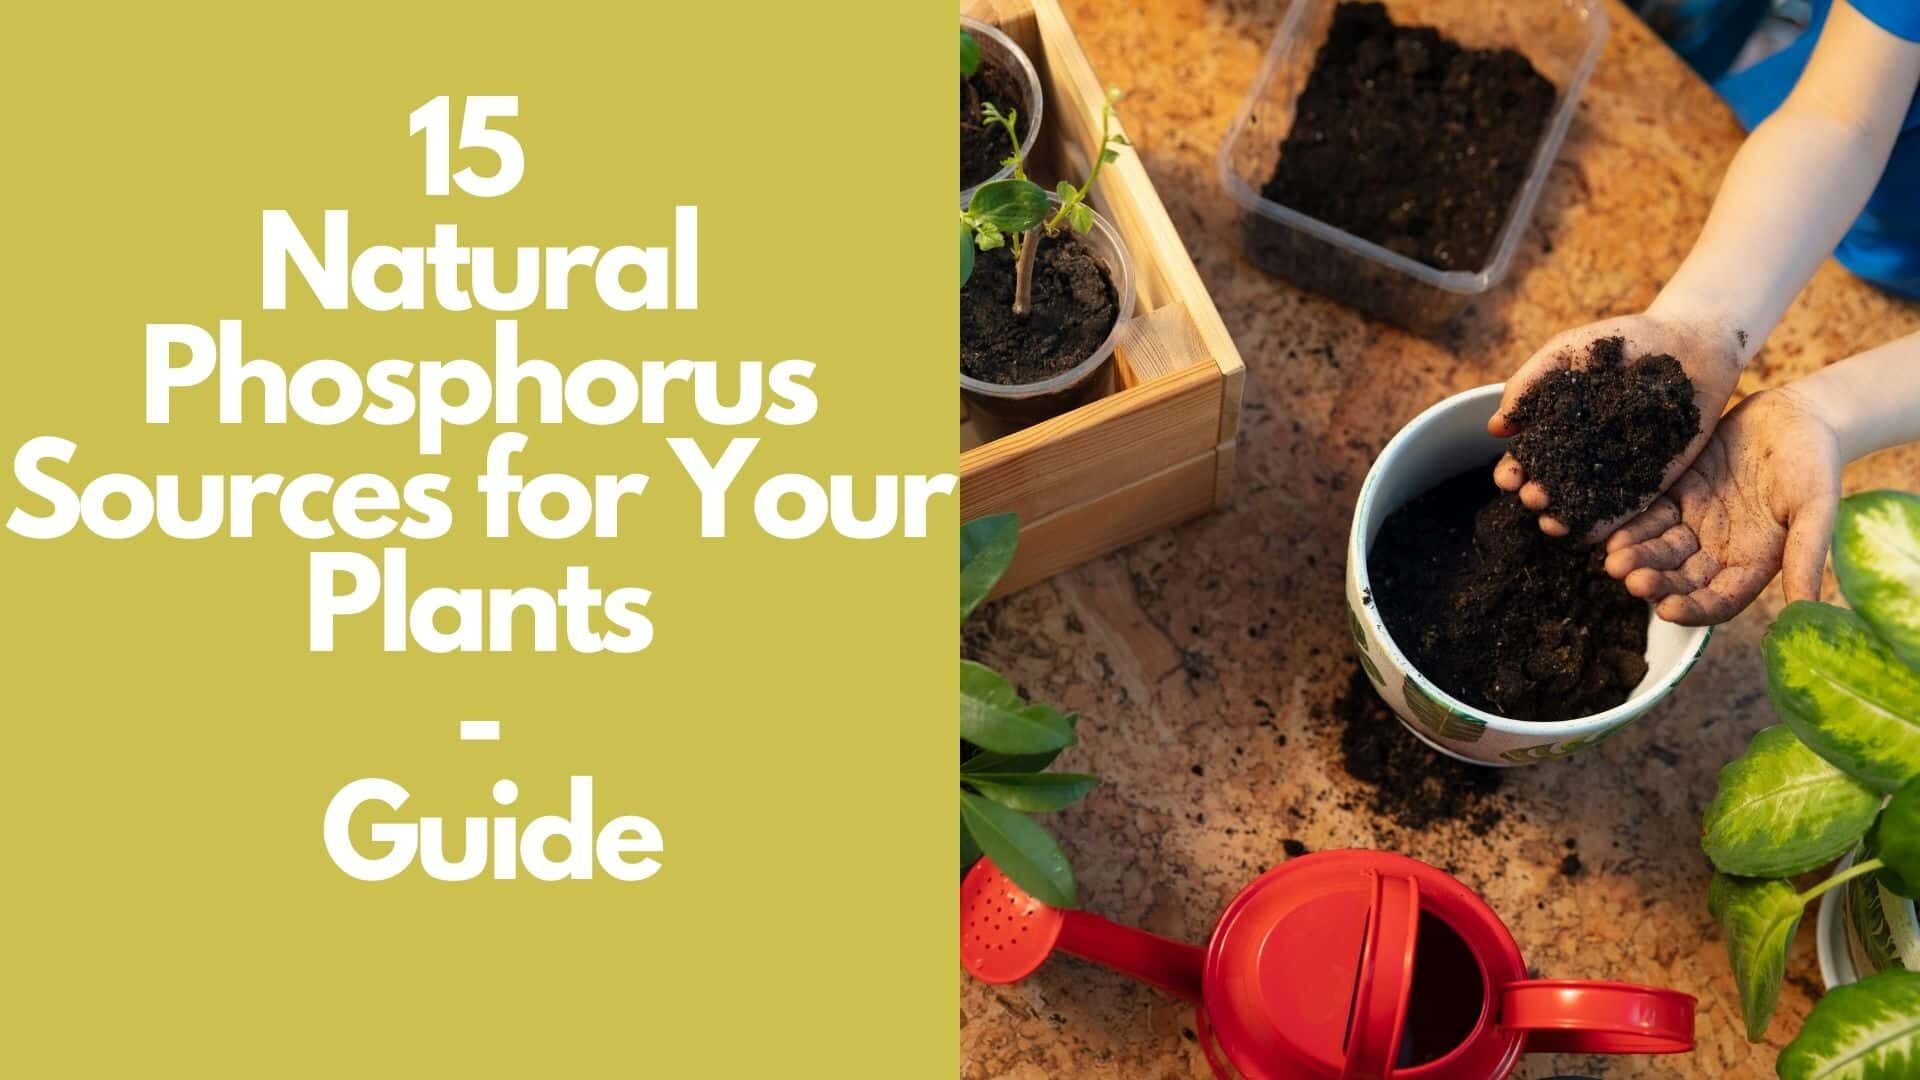 15 Natural Phosphorus Sources for Your Plants: Guide